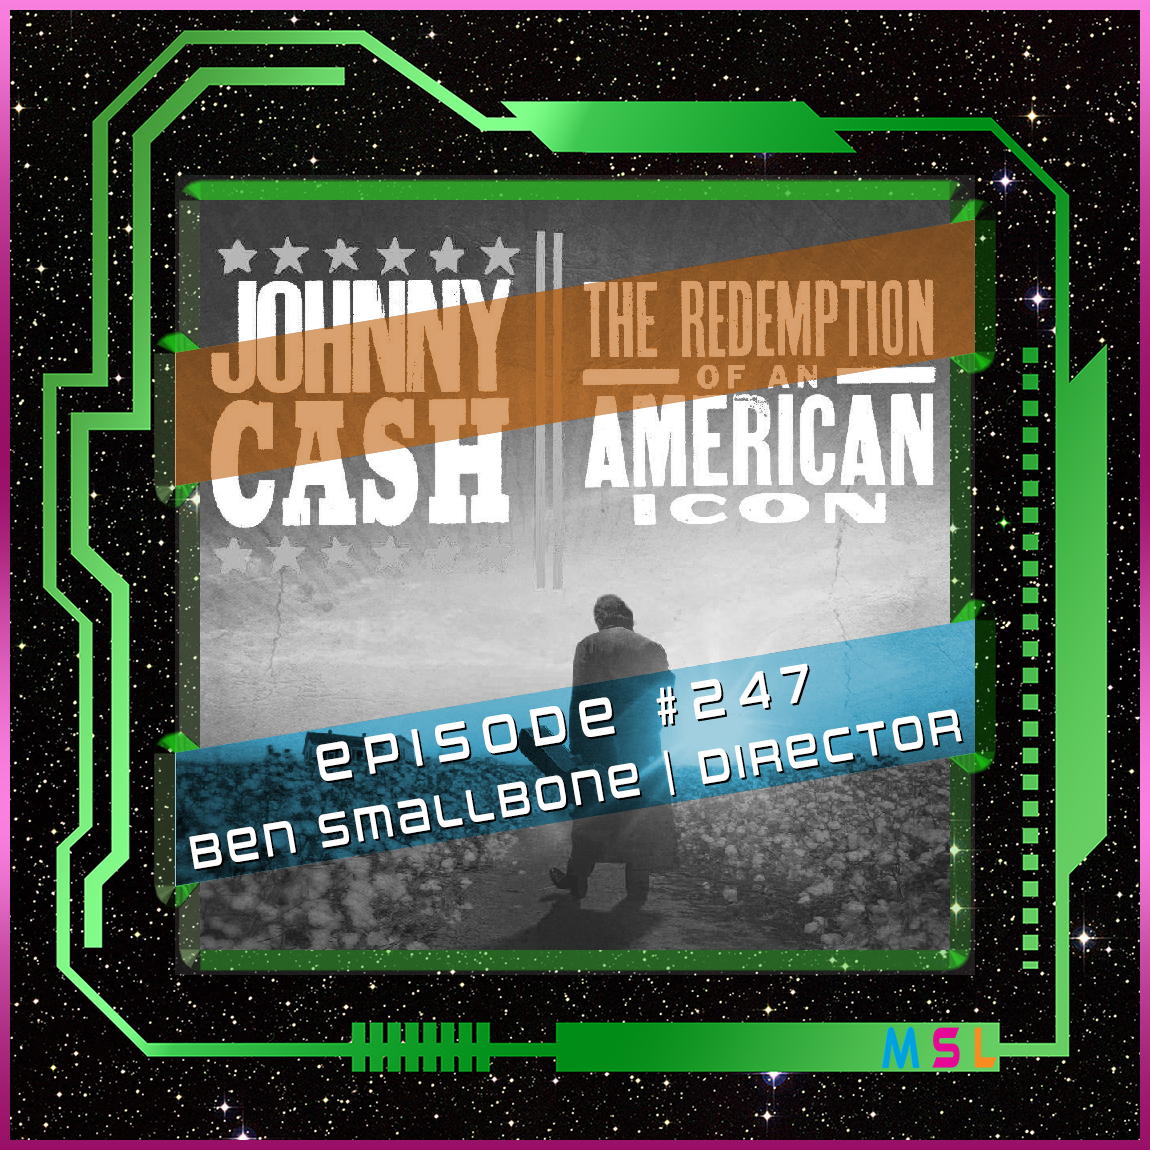 247 | Ben Smallbone (Johnny Cash: The Redemption of an American Icon)